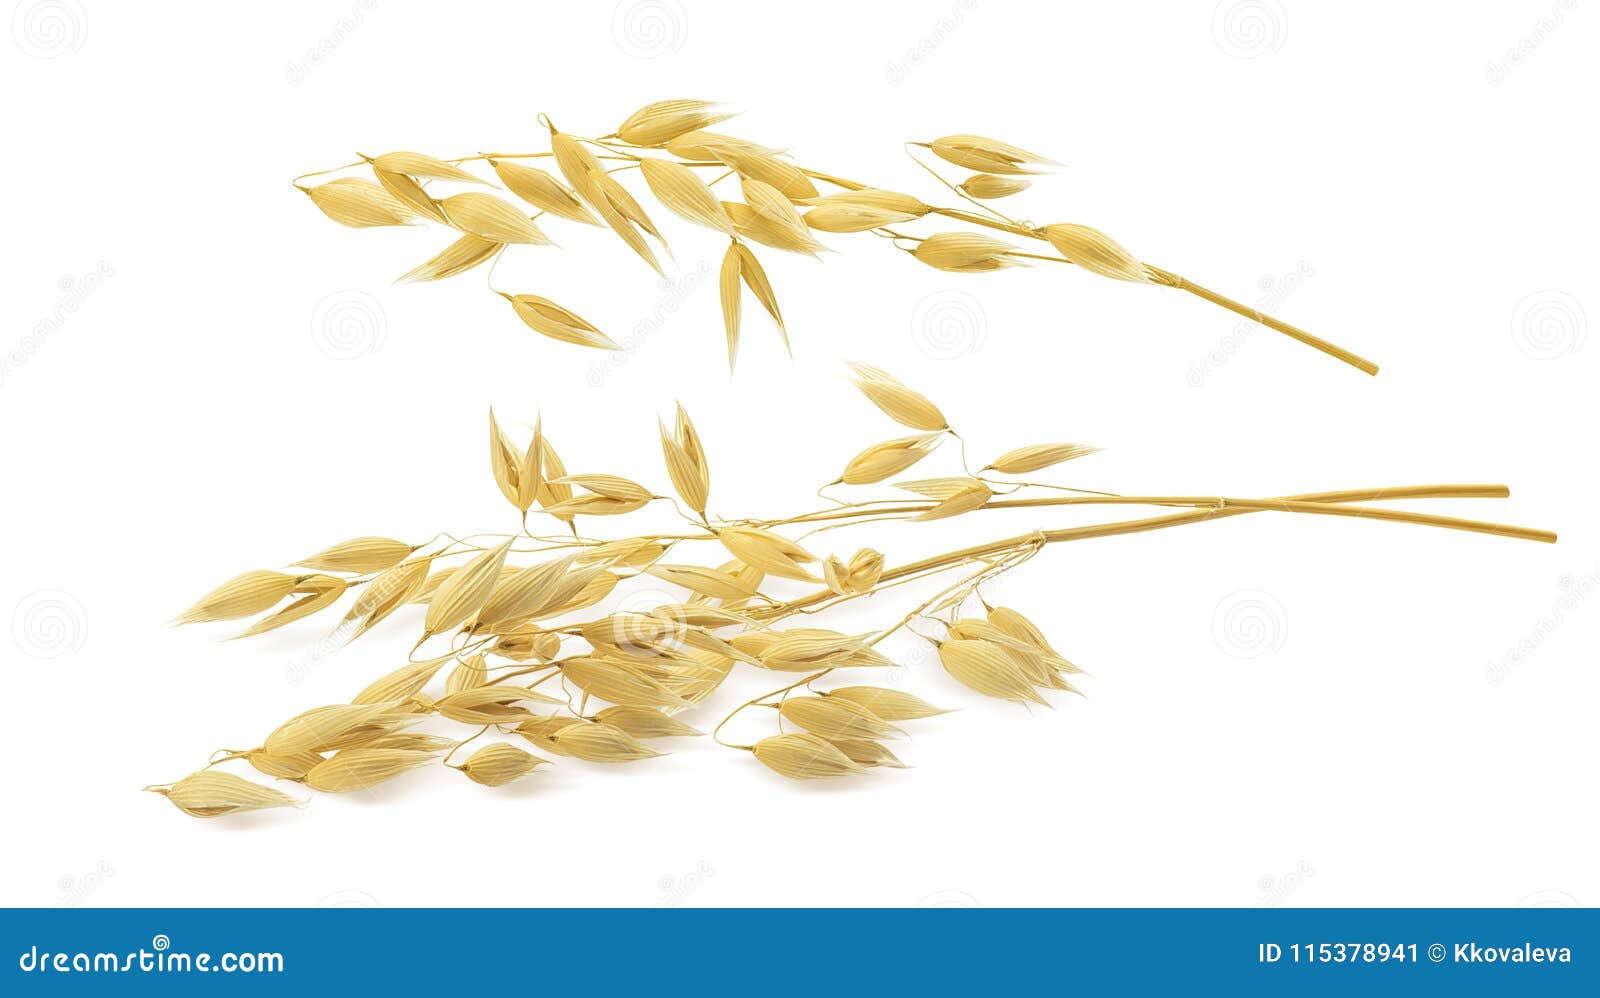 oat ears  on white background with clipping path